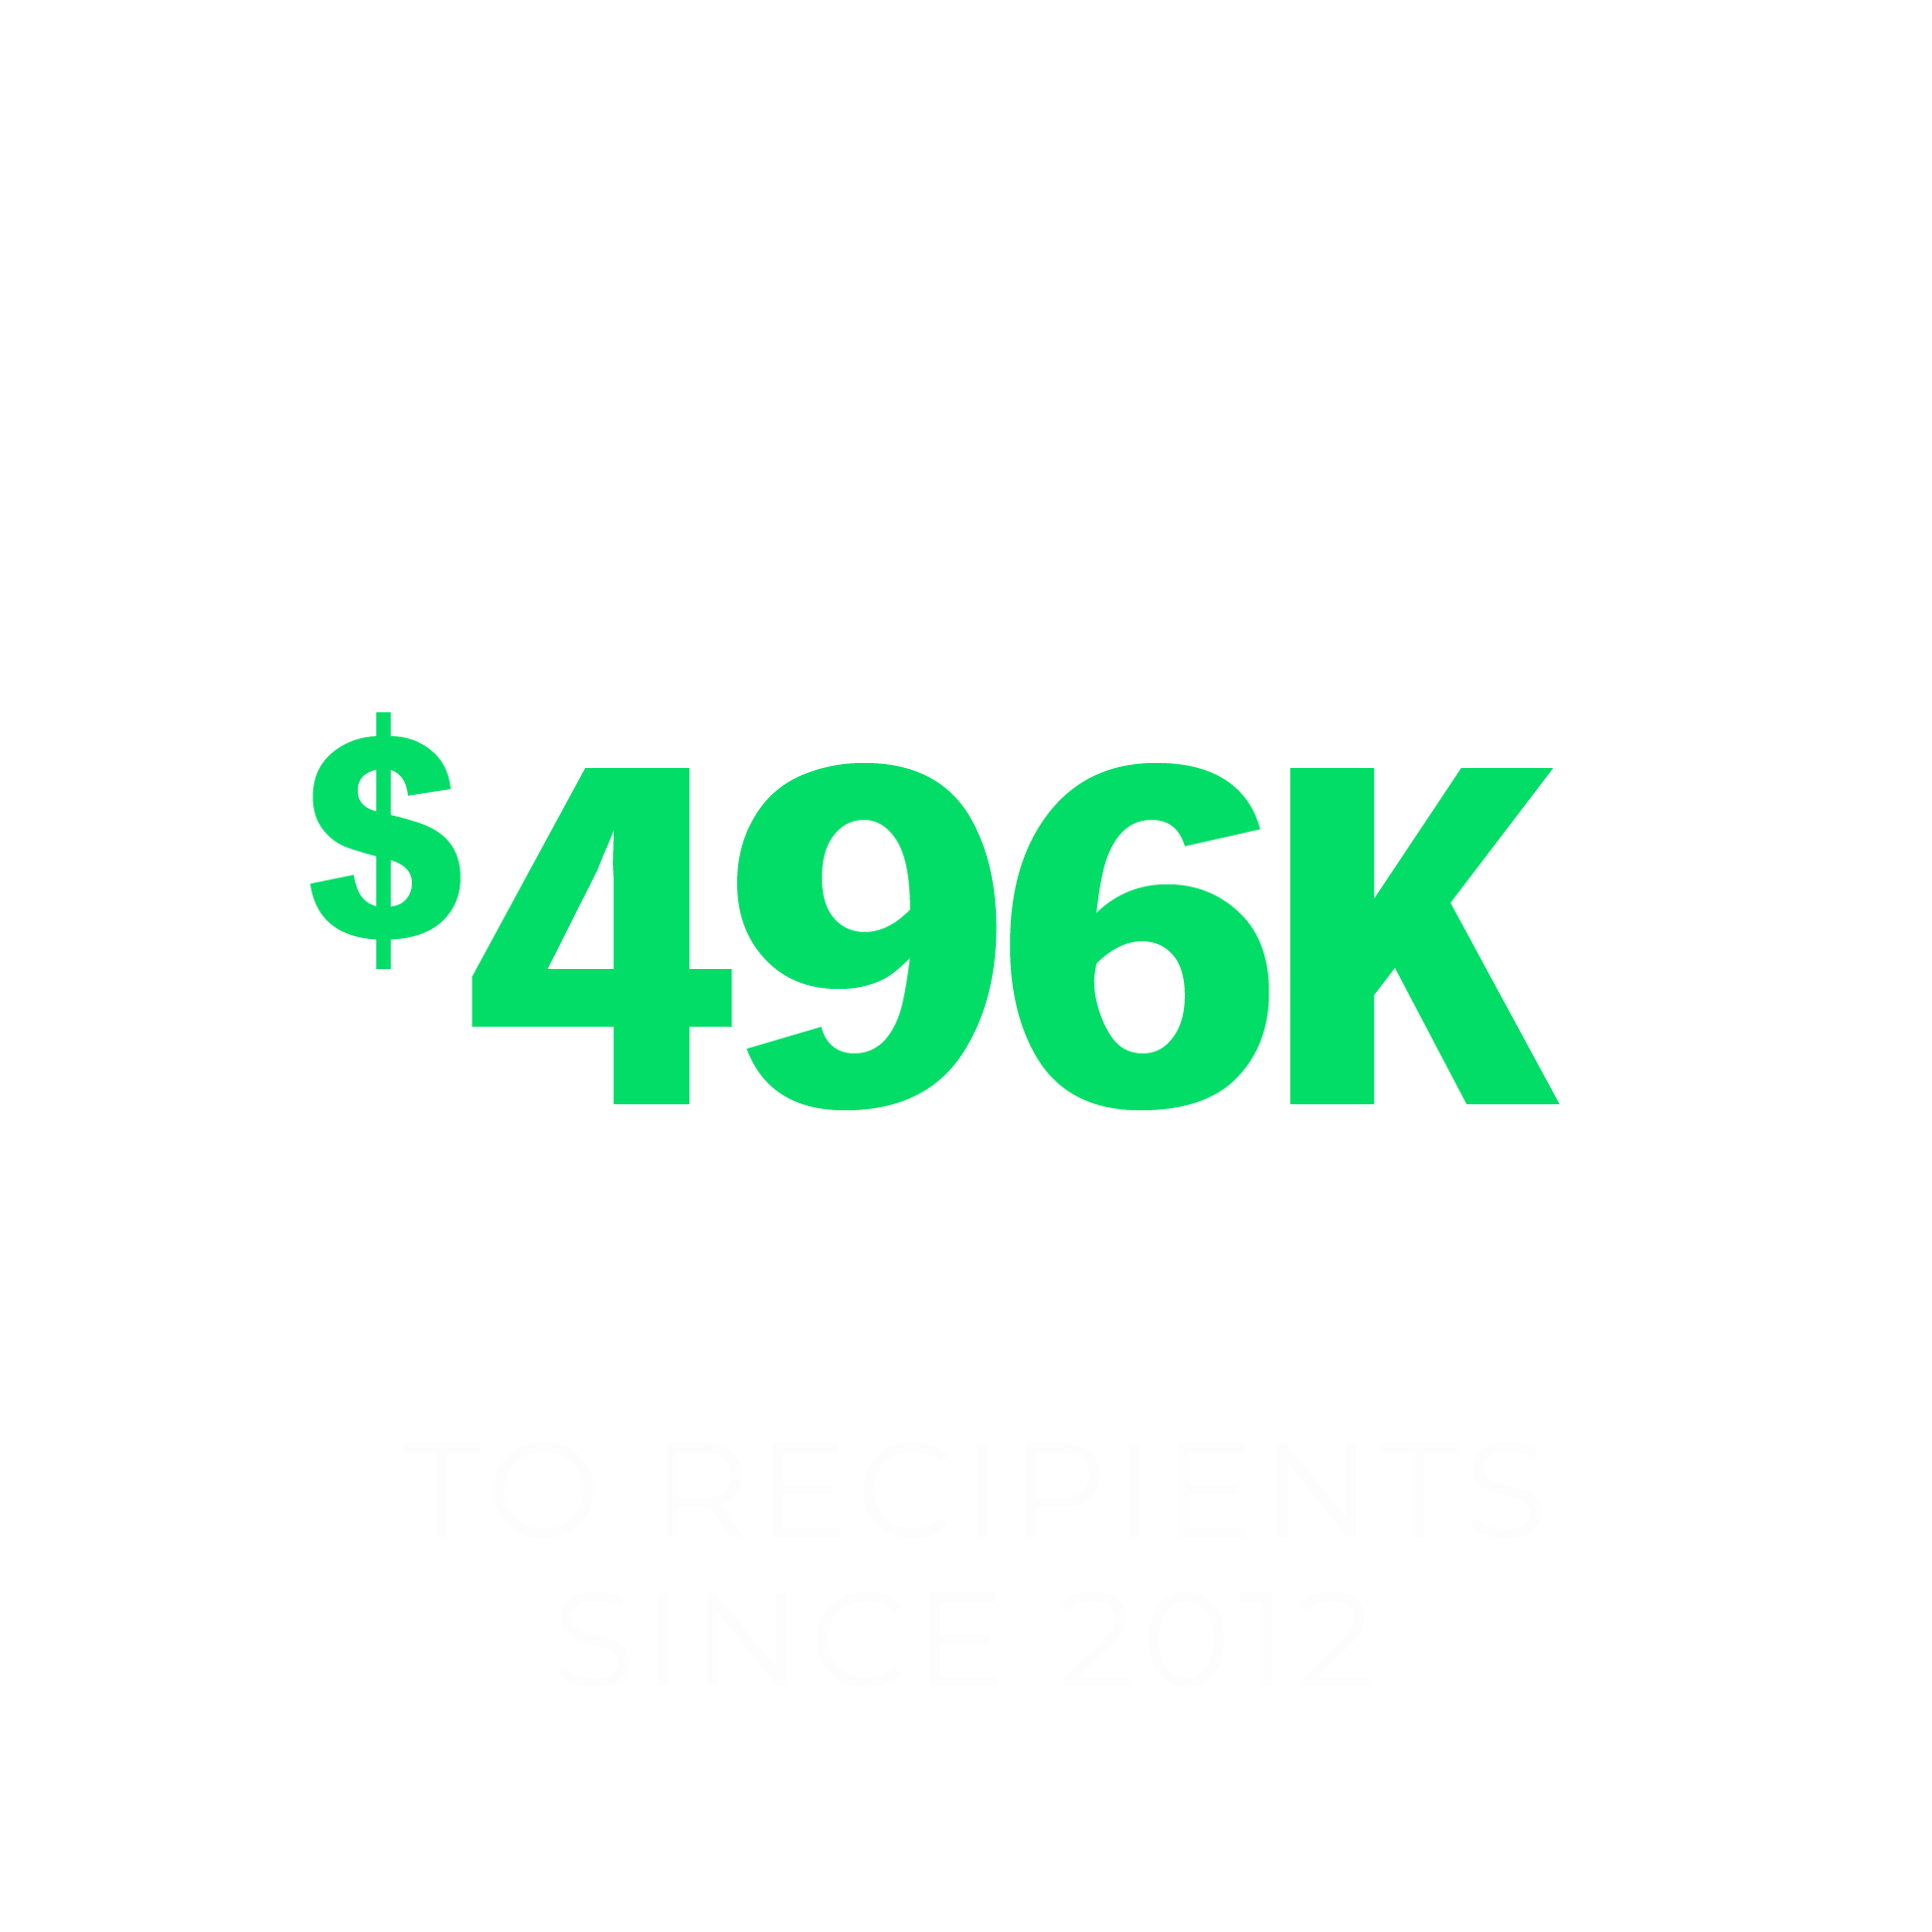 Awarded More Than $496,000 To Repcipients Since 2012